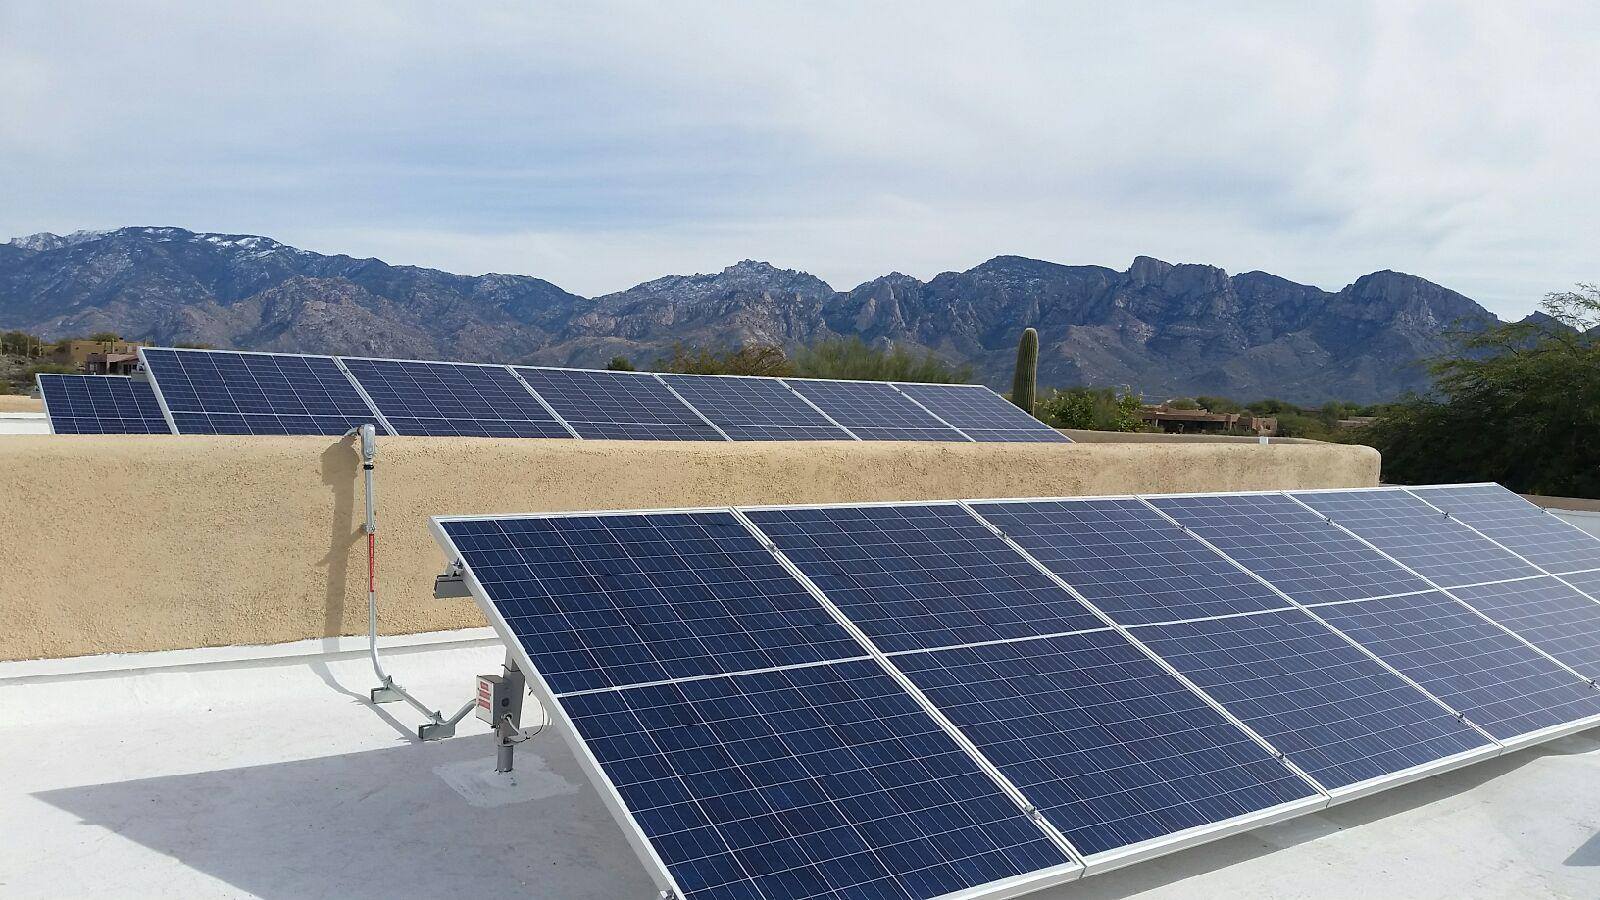 Do solar panels protect or cool my roof?